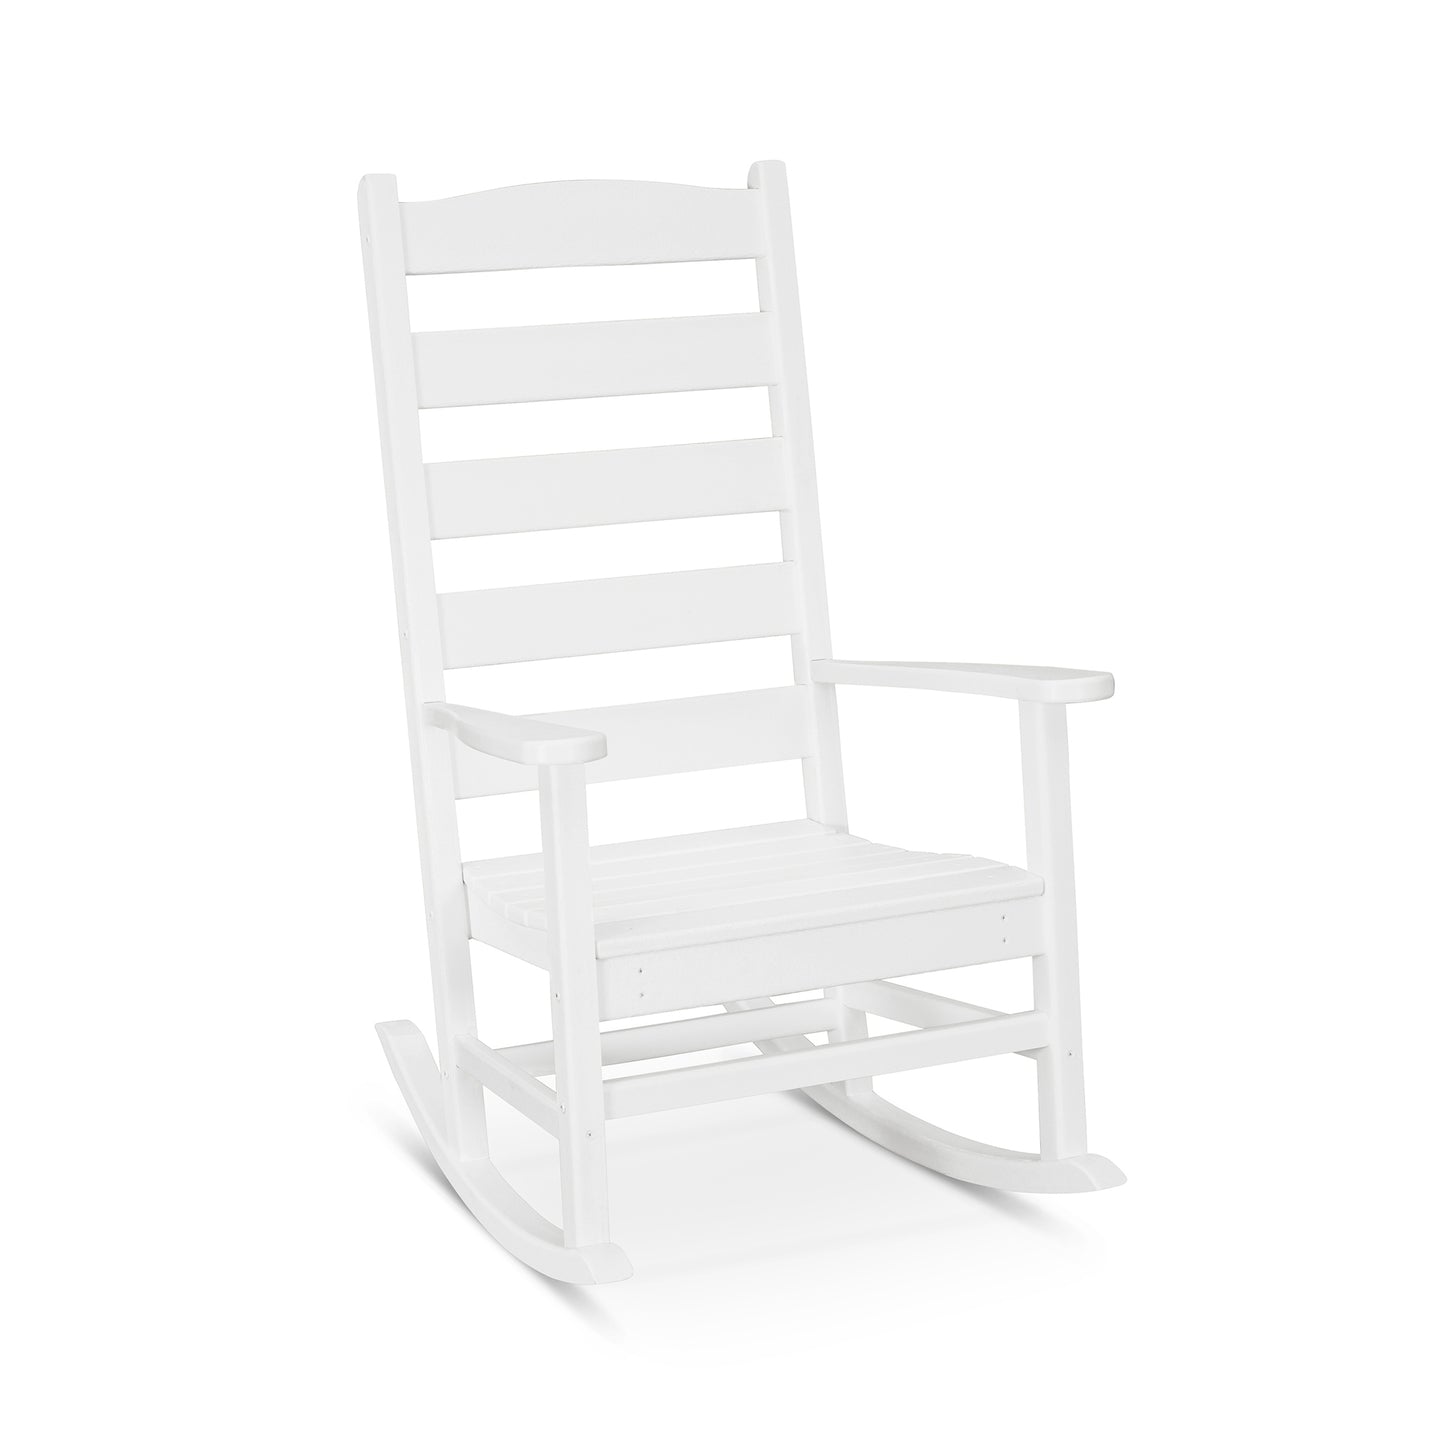 A white POLYWOOD Shaker Porch Rocking Chair isolated on a plain white background, featuring a high back with horizontal slats and armrests.